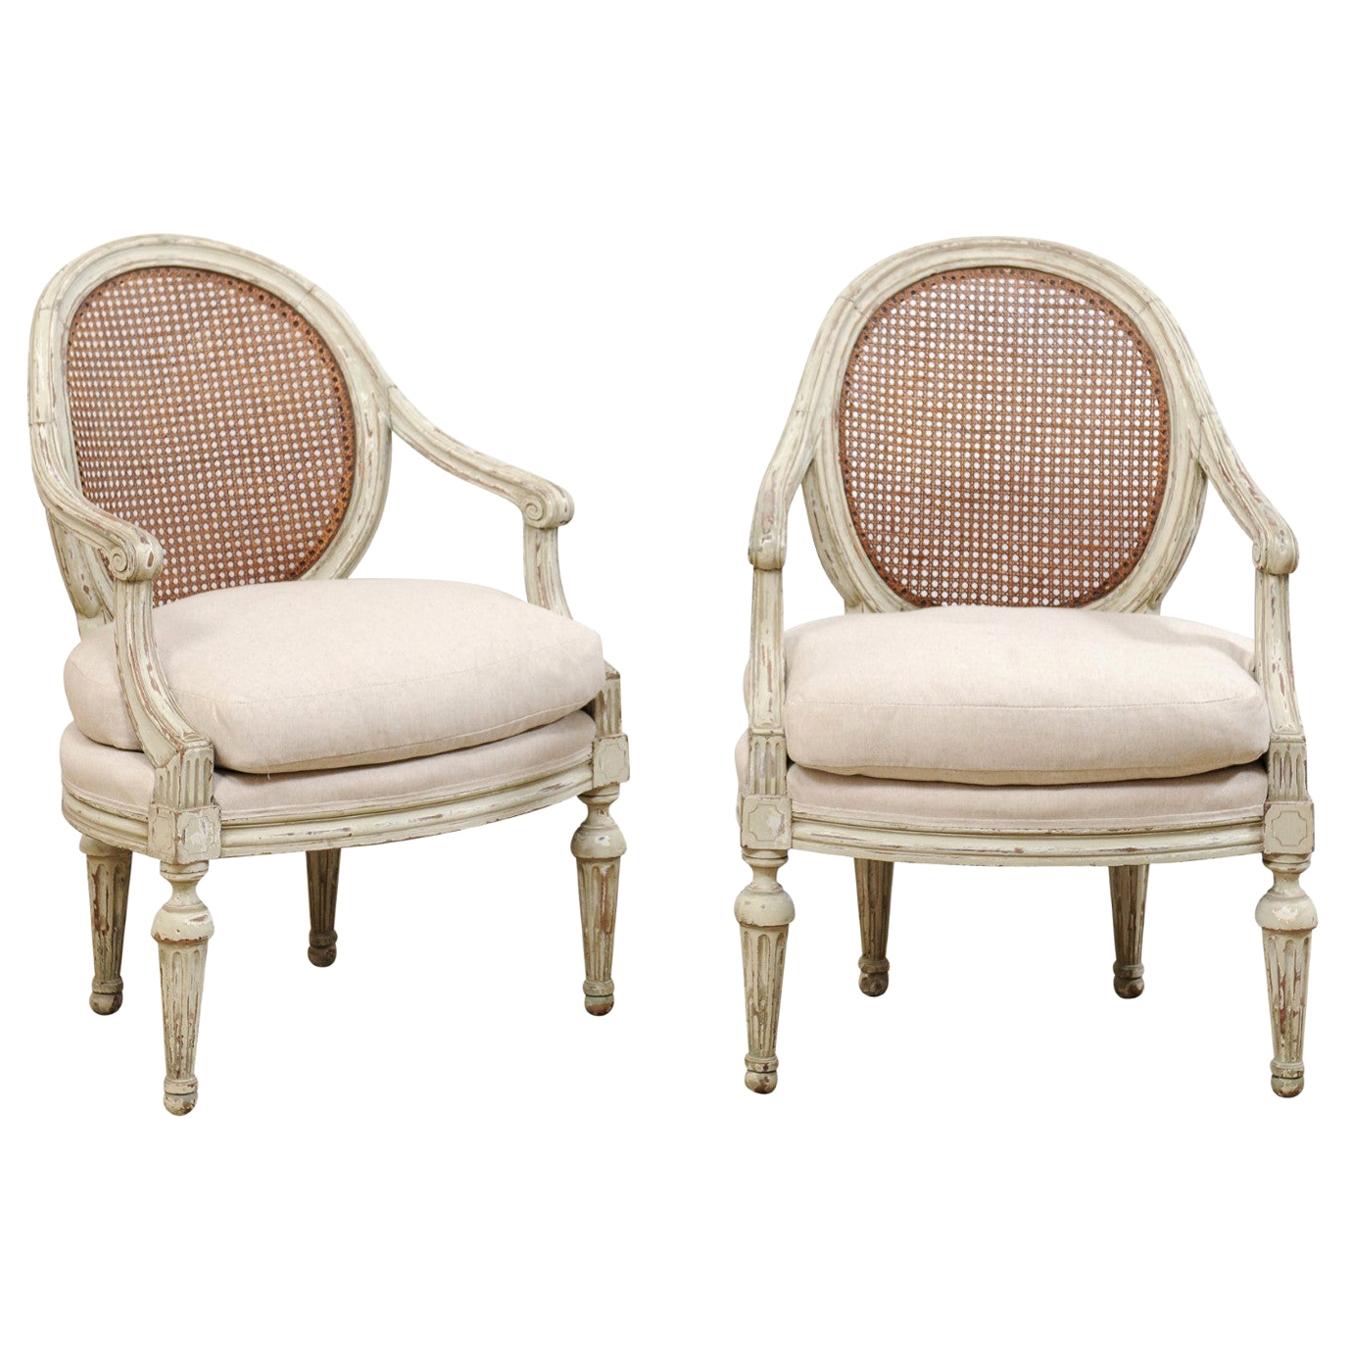 Pair of French Louis XVI Style Armchairs with Caned Backs and Upholstered Seats